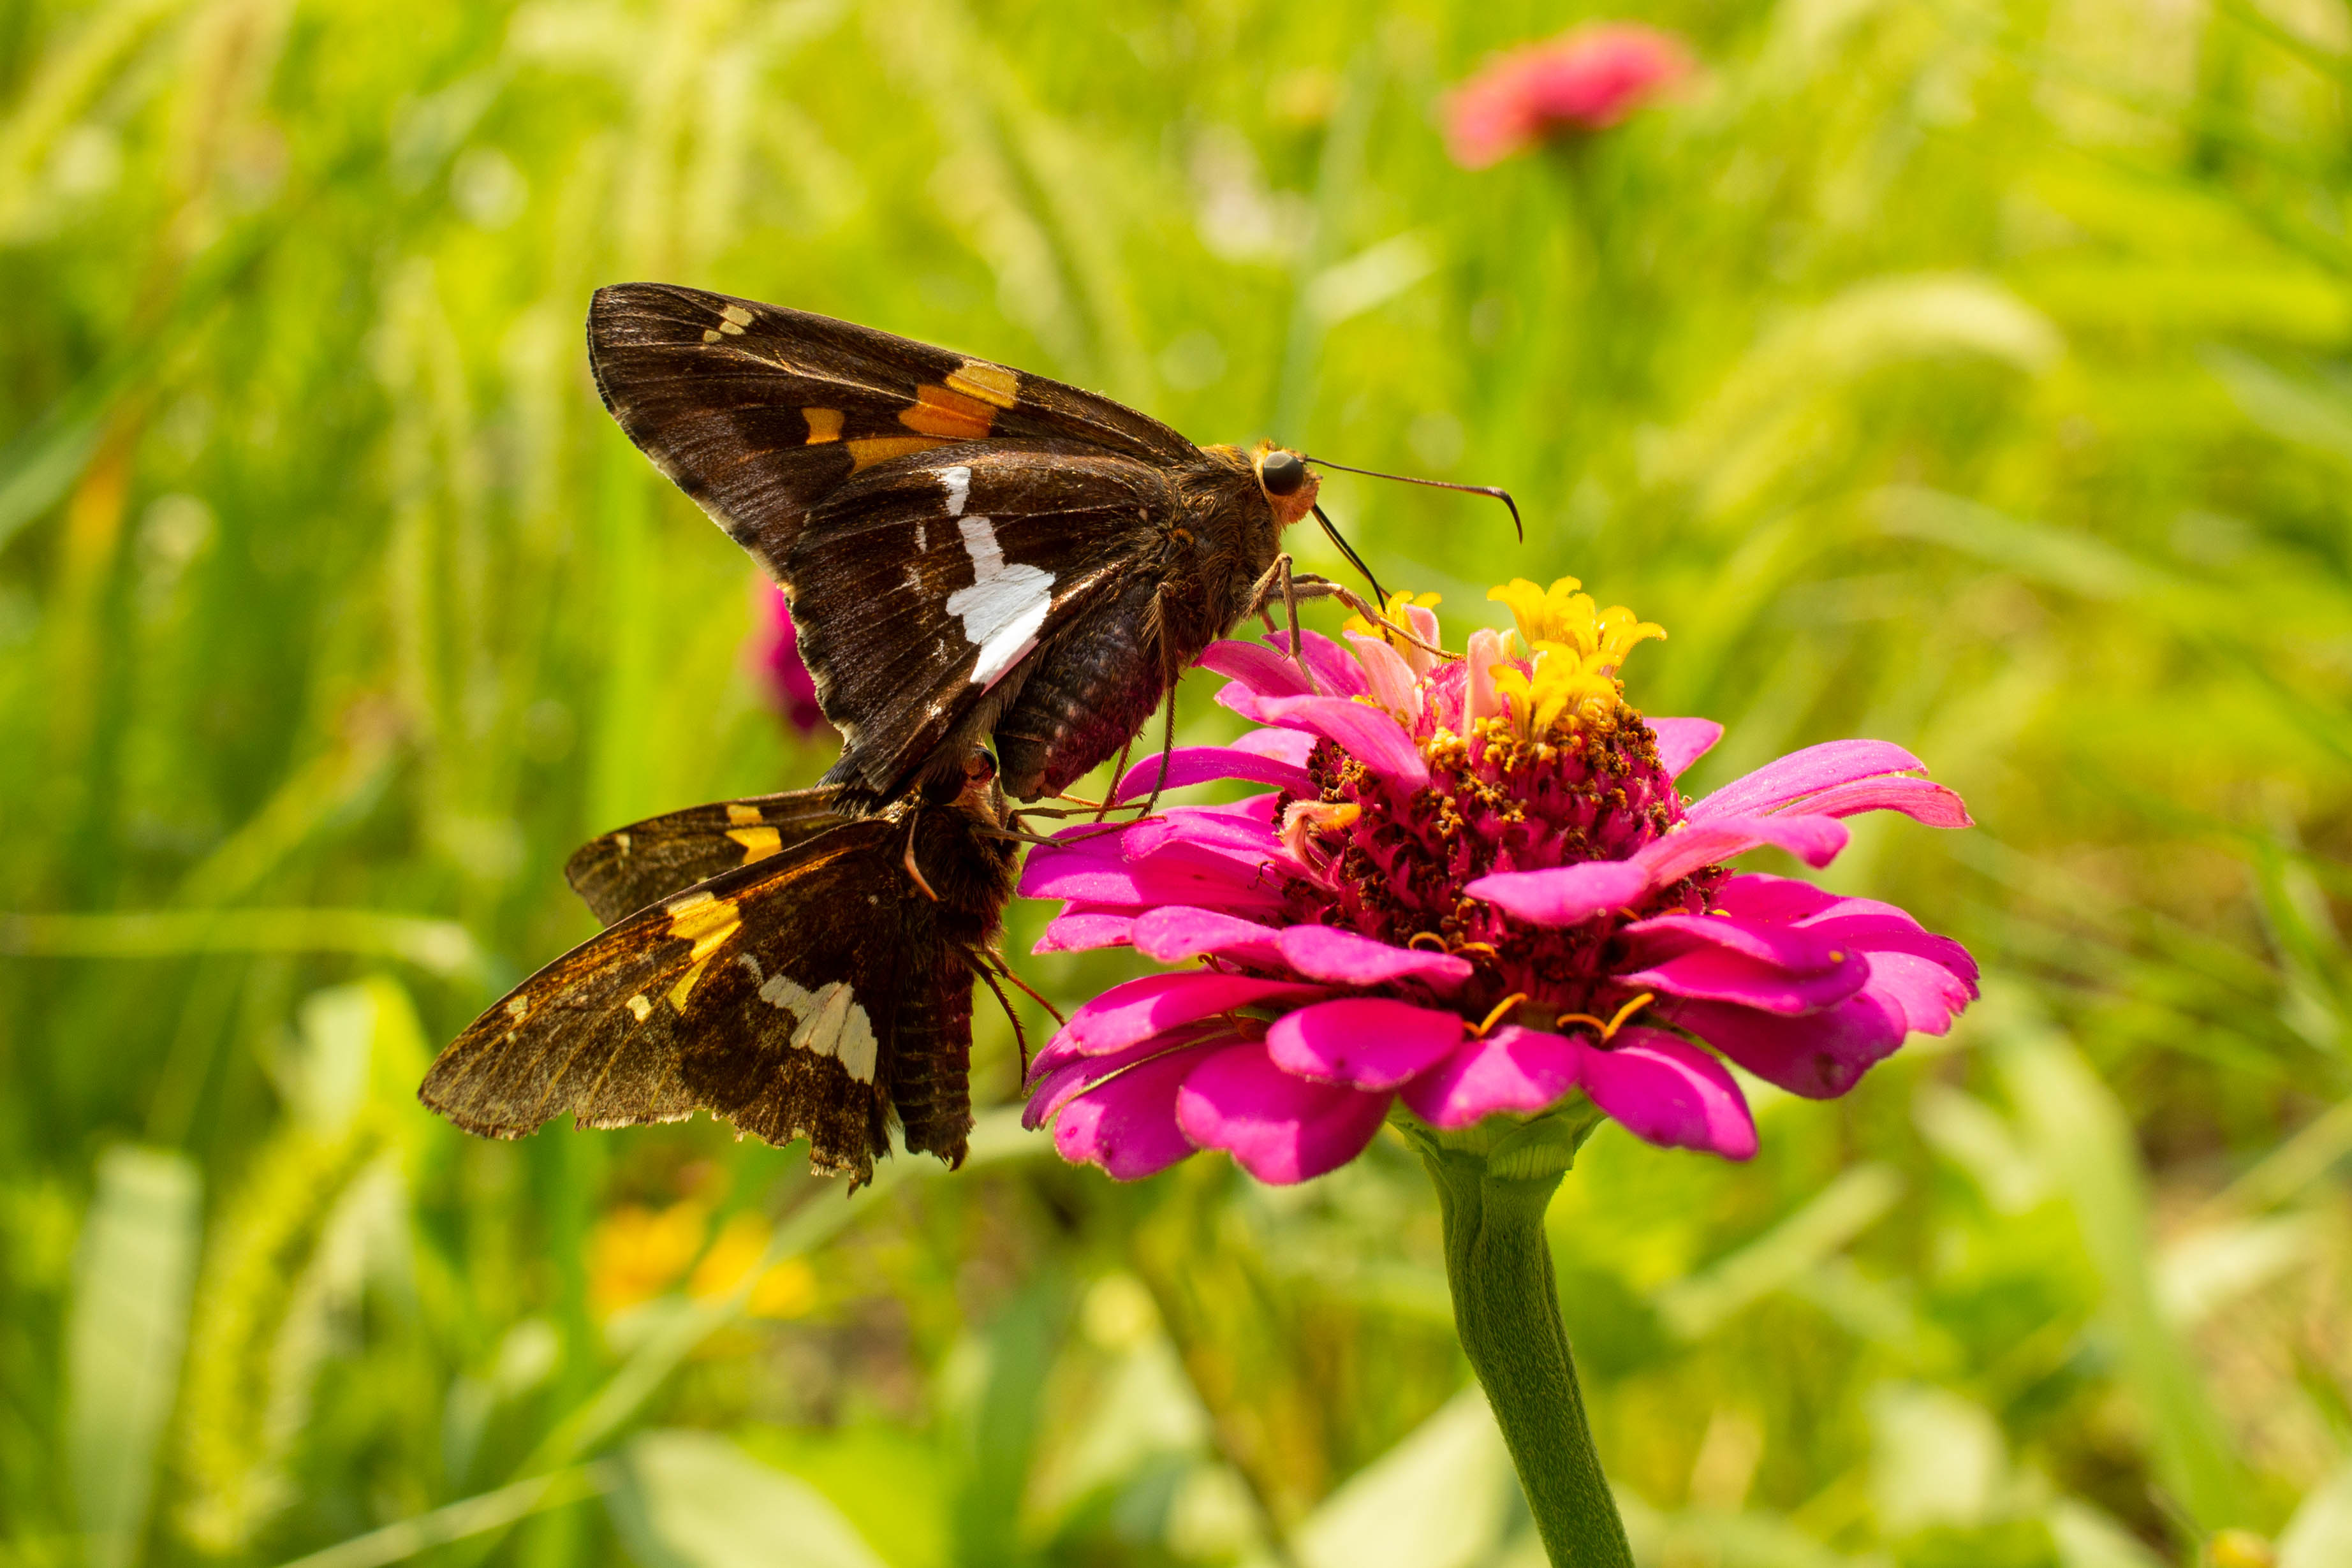 Silver spotted skipper butterfly in the pollinator garden